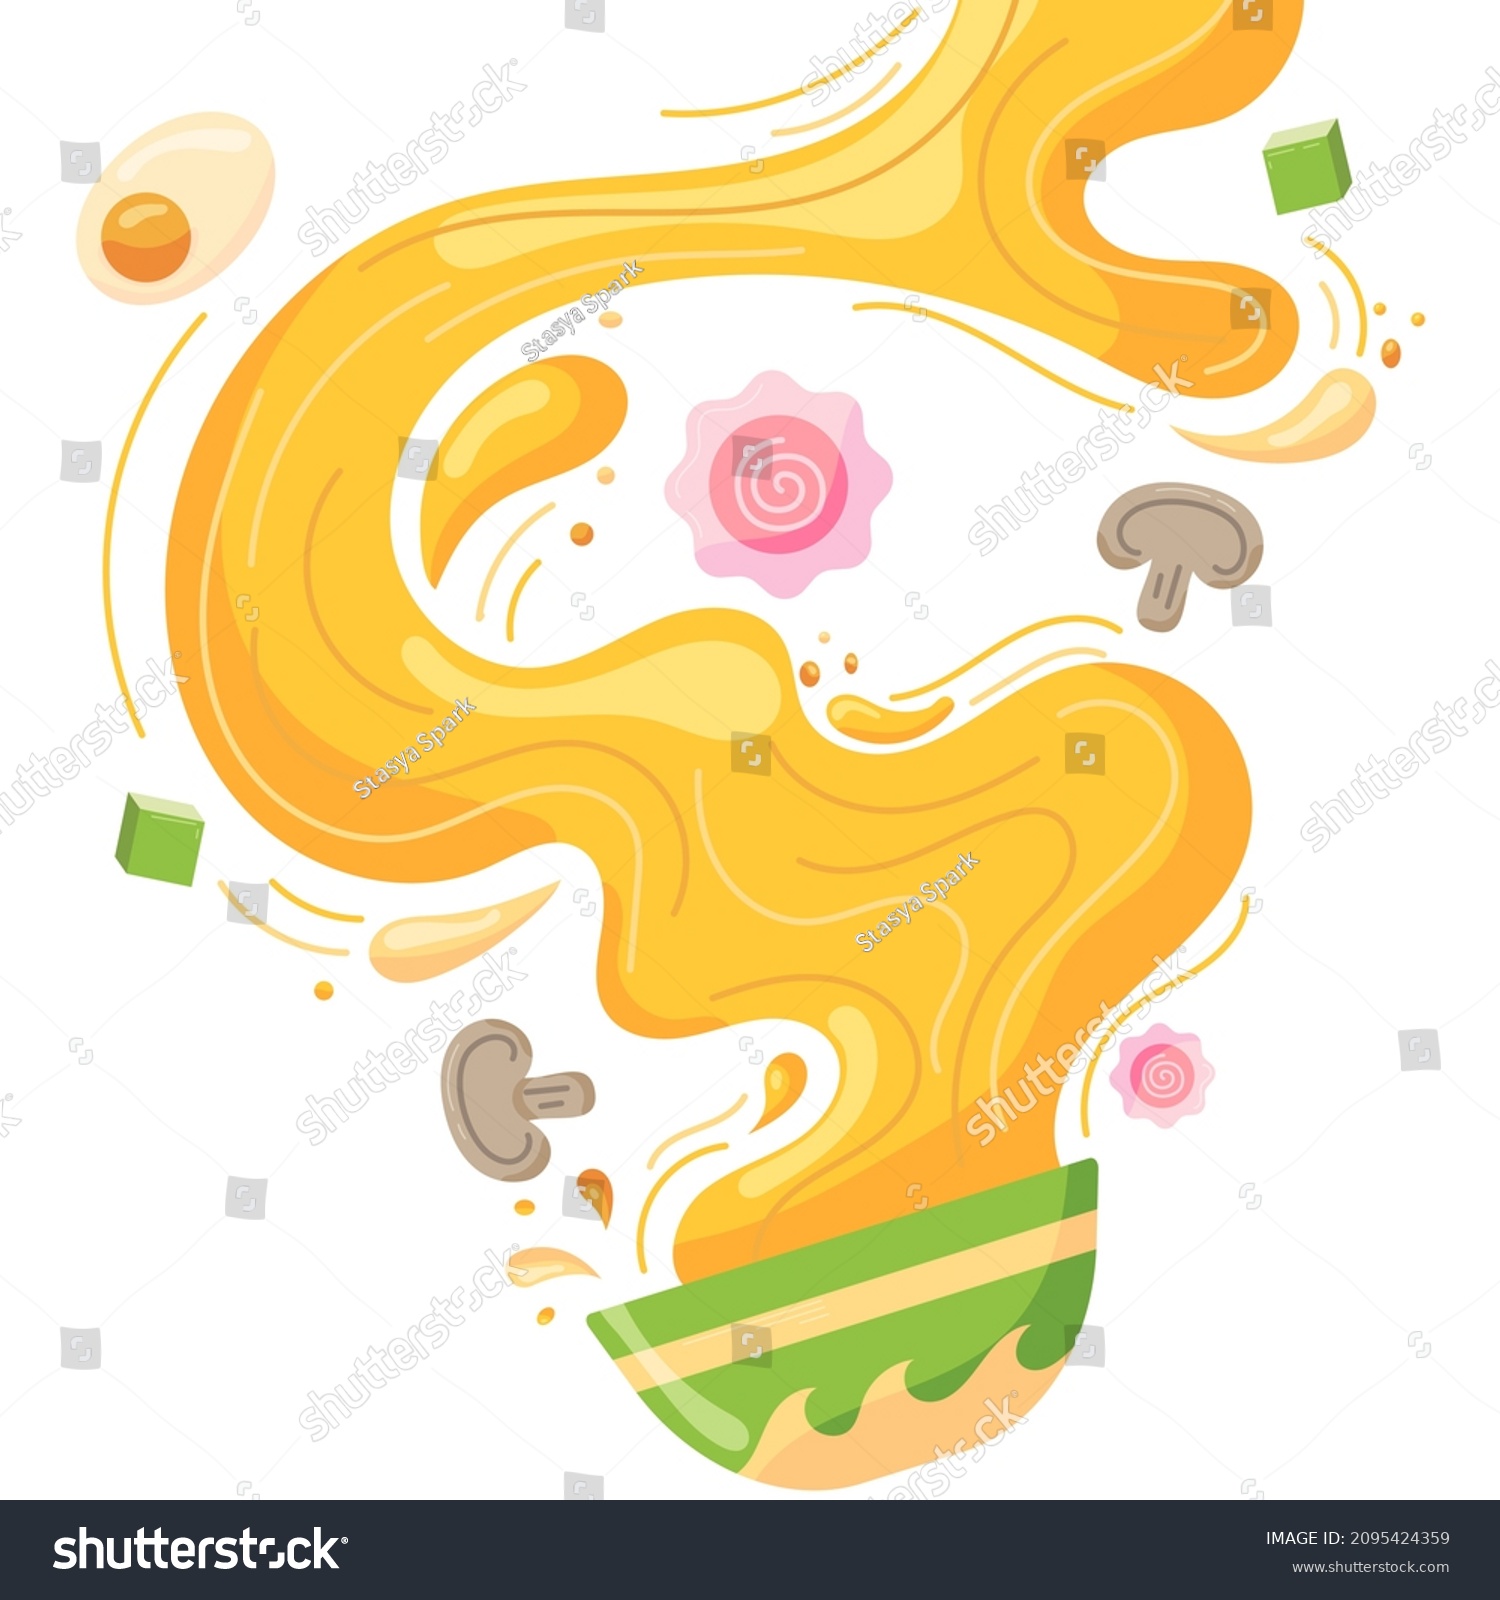 Soup splashing out of a plate, Asian broth with crabs, onions, mushrooms, egg, and noodles. Deep soup plate for Asian cuisine menu in flat style. Vector illustration #2095424359